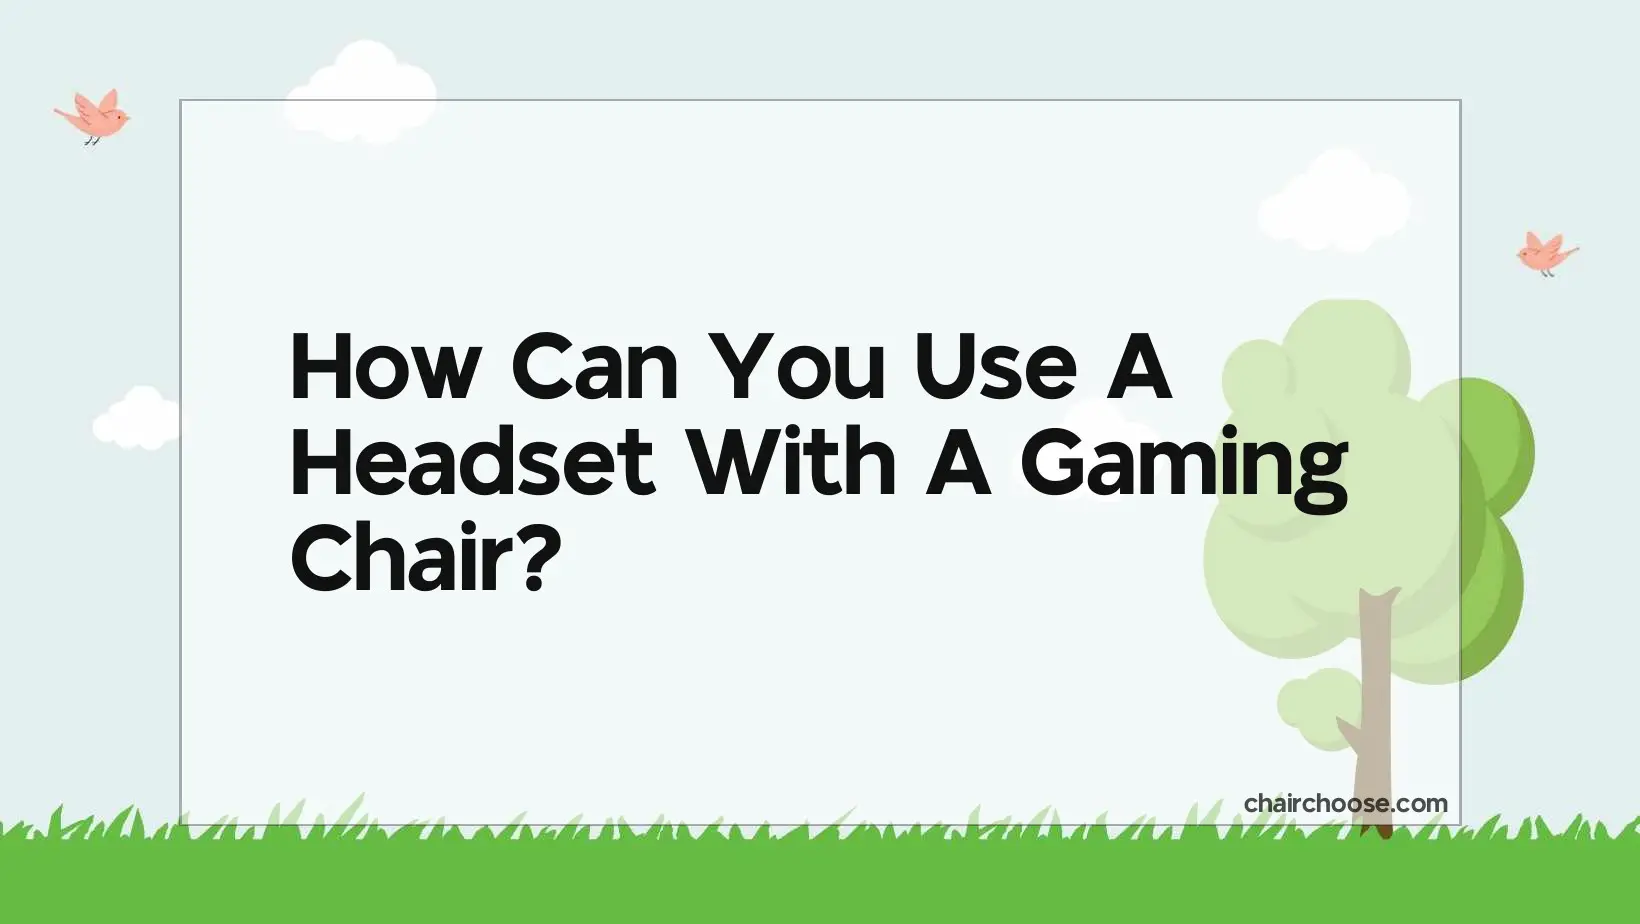 How Can You Use A Headset With A Gaming Chair?